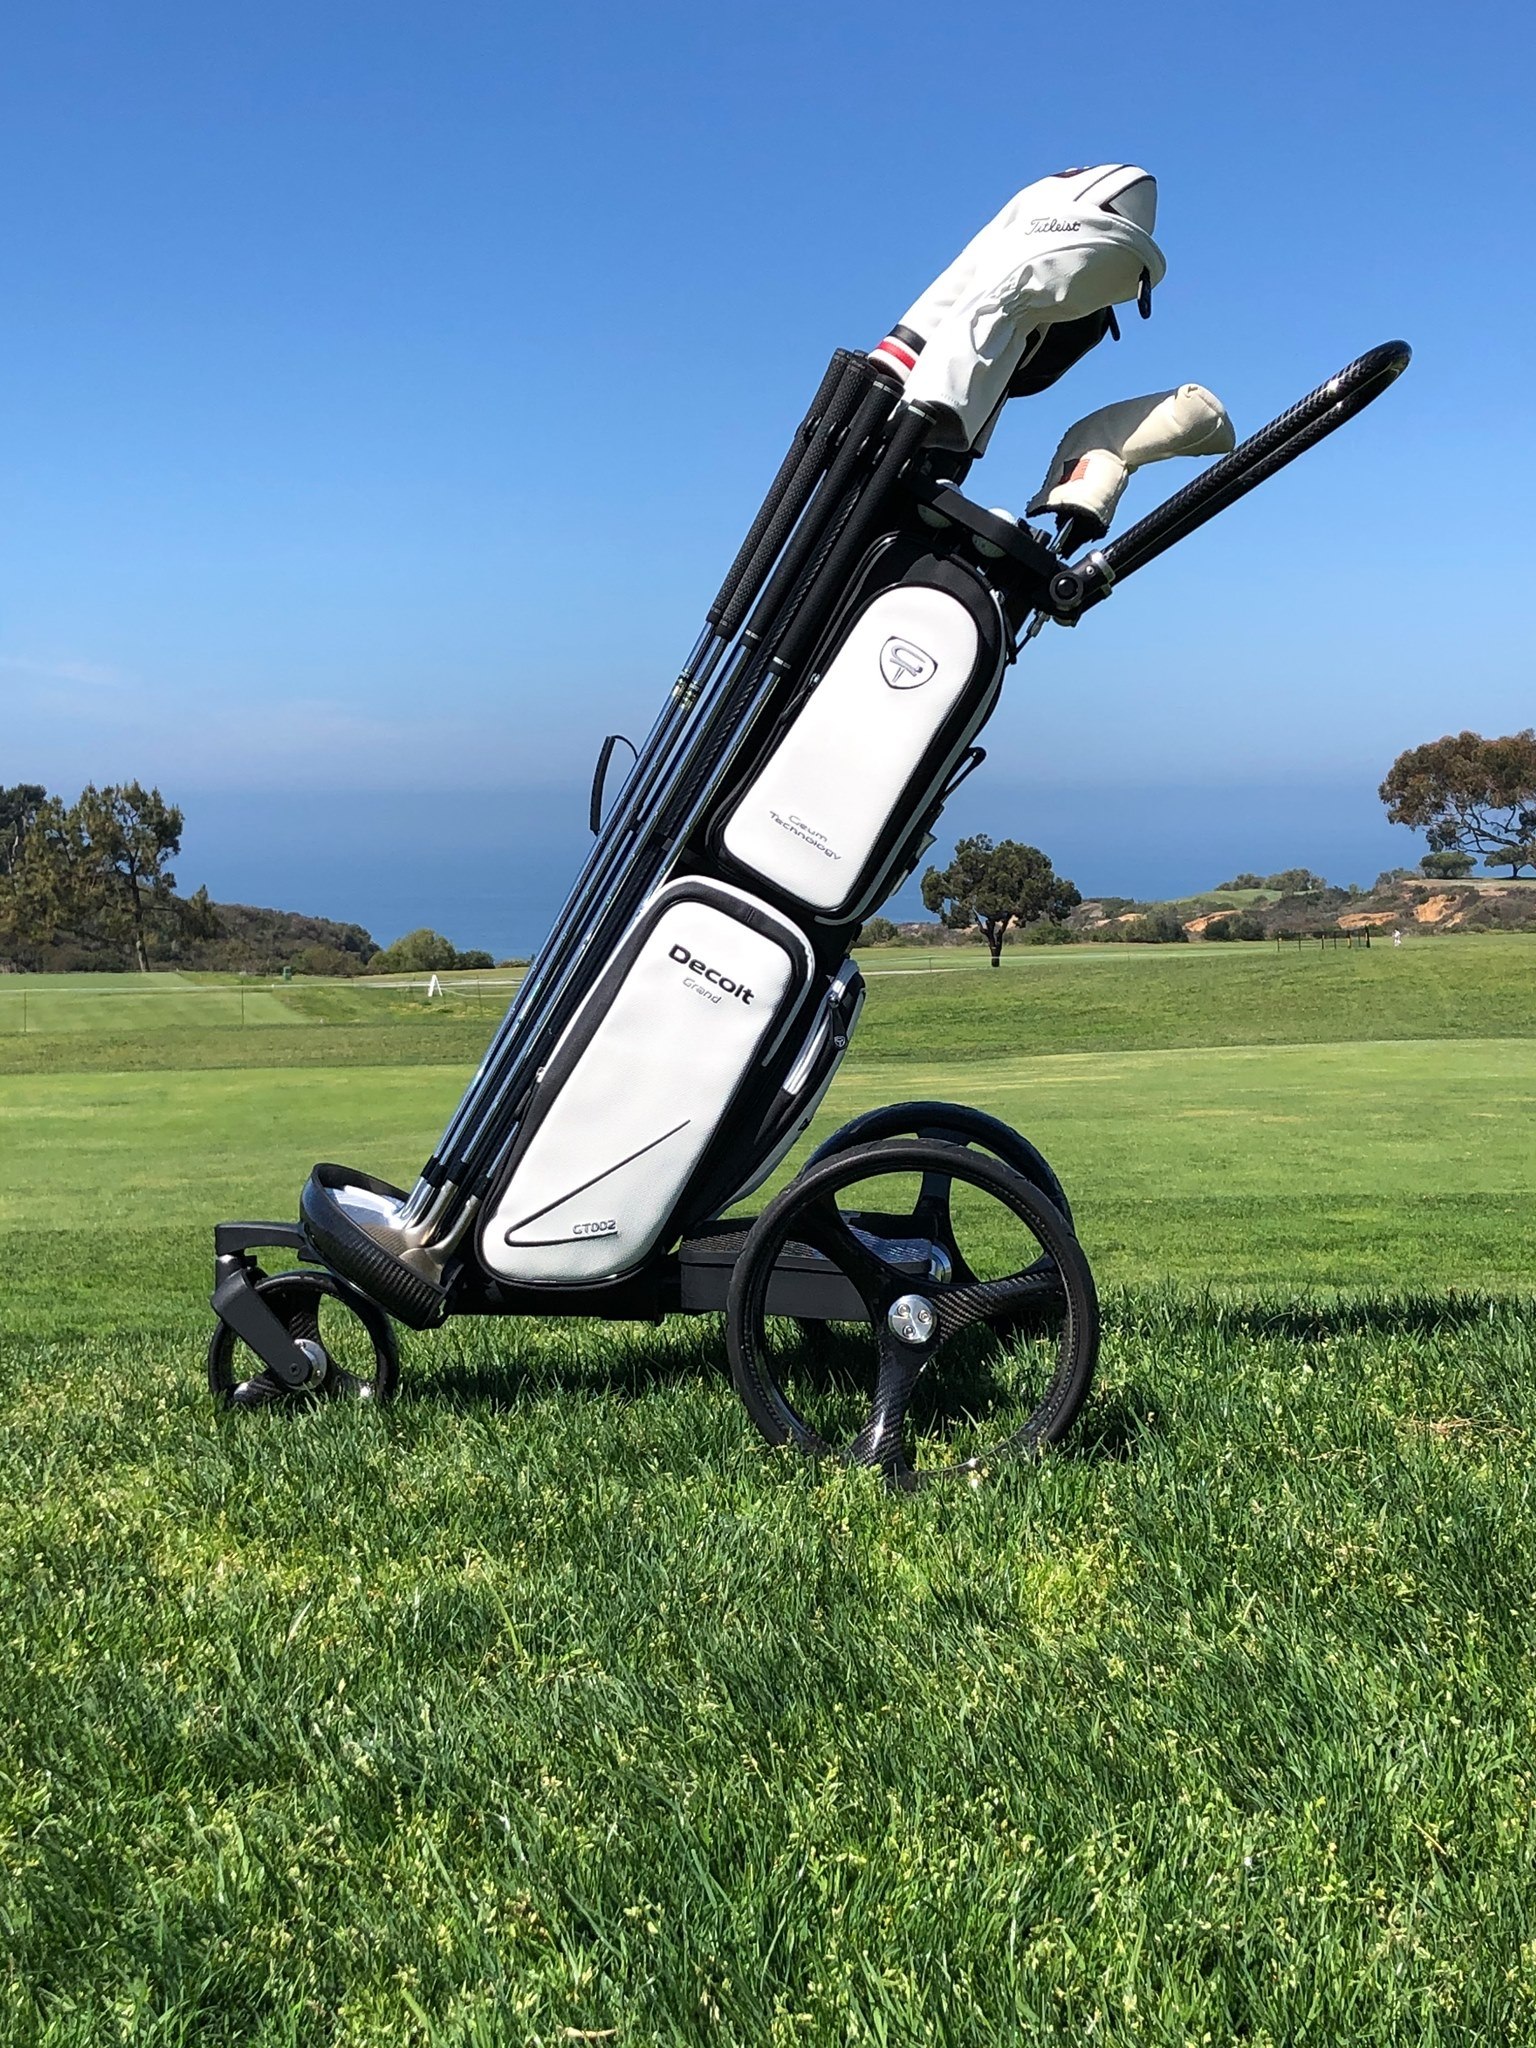 Decolt Grand - Electric Golf Carts offer the Ultimate Experience with Golfers that Walk and Want to get Exercise